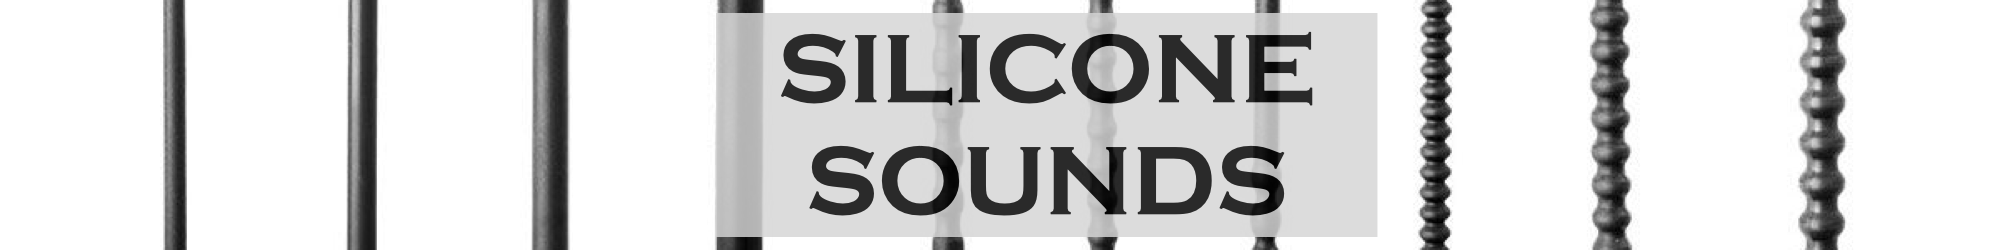 silicone sounds banner